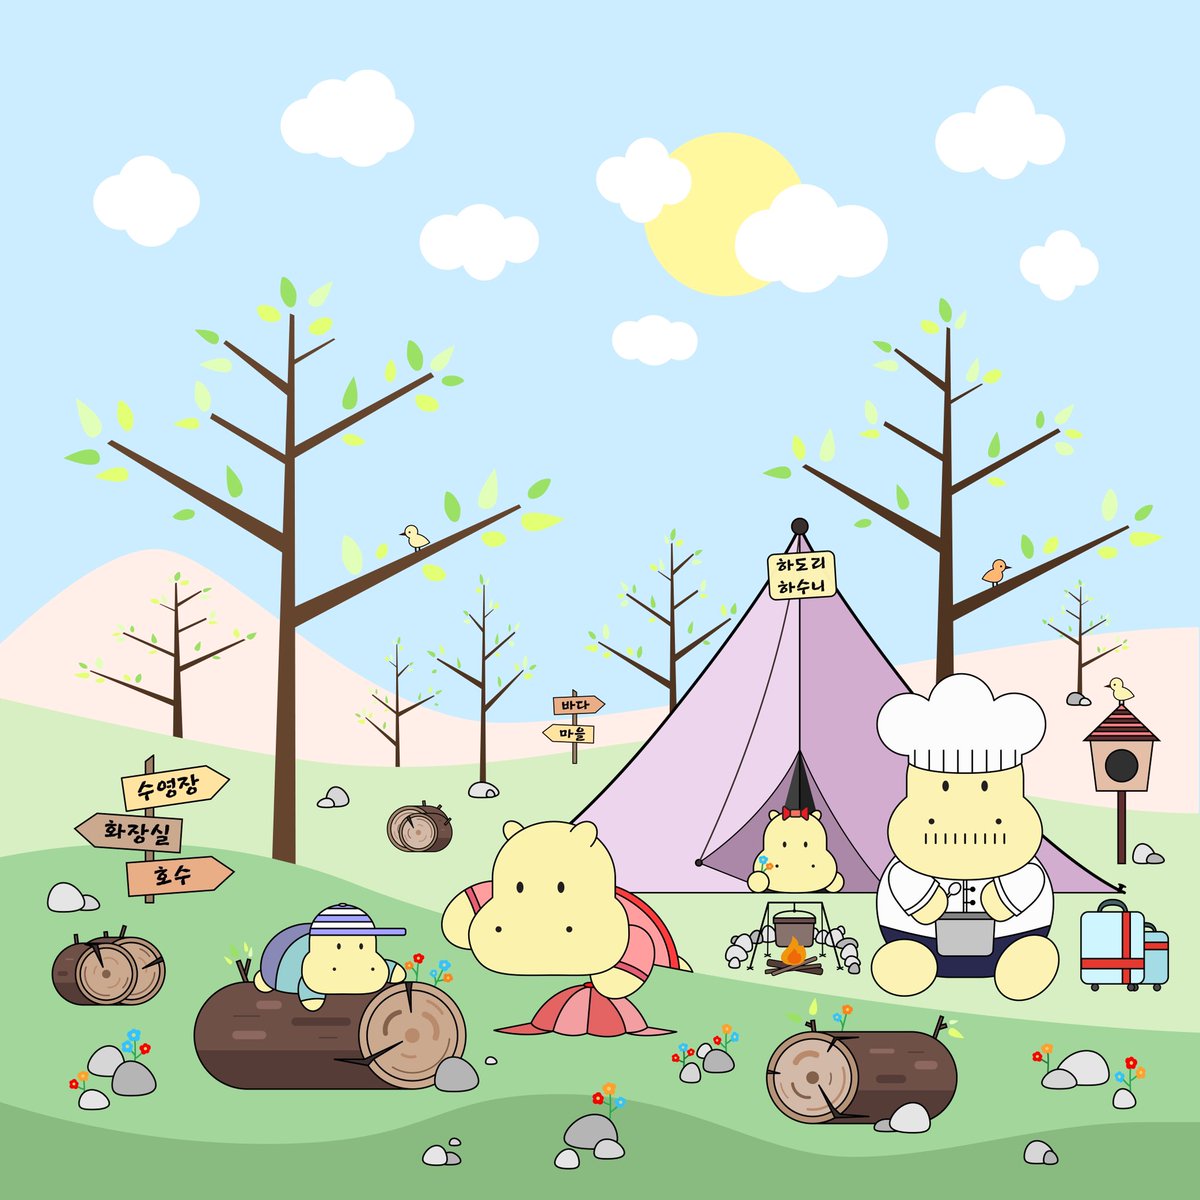 Today, the Korean Hippo family came camping. Camping sites in Korea are well-equipped with convenient facilities.

#hippos #hippo #hippopotamus #korea #korean #k-hippo #한국 #하마 #illustration #character #cartoon #campsite #camping #캠핑 #CampingAdventure #SeoulSunsetCamping